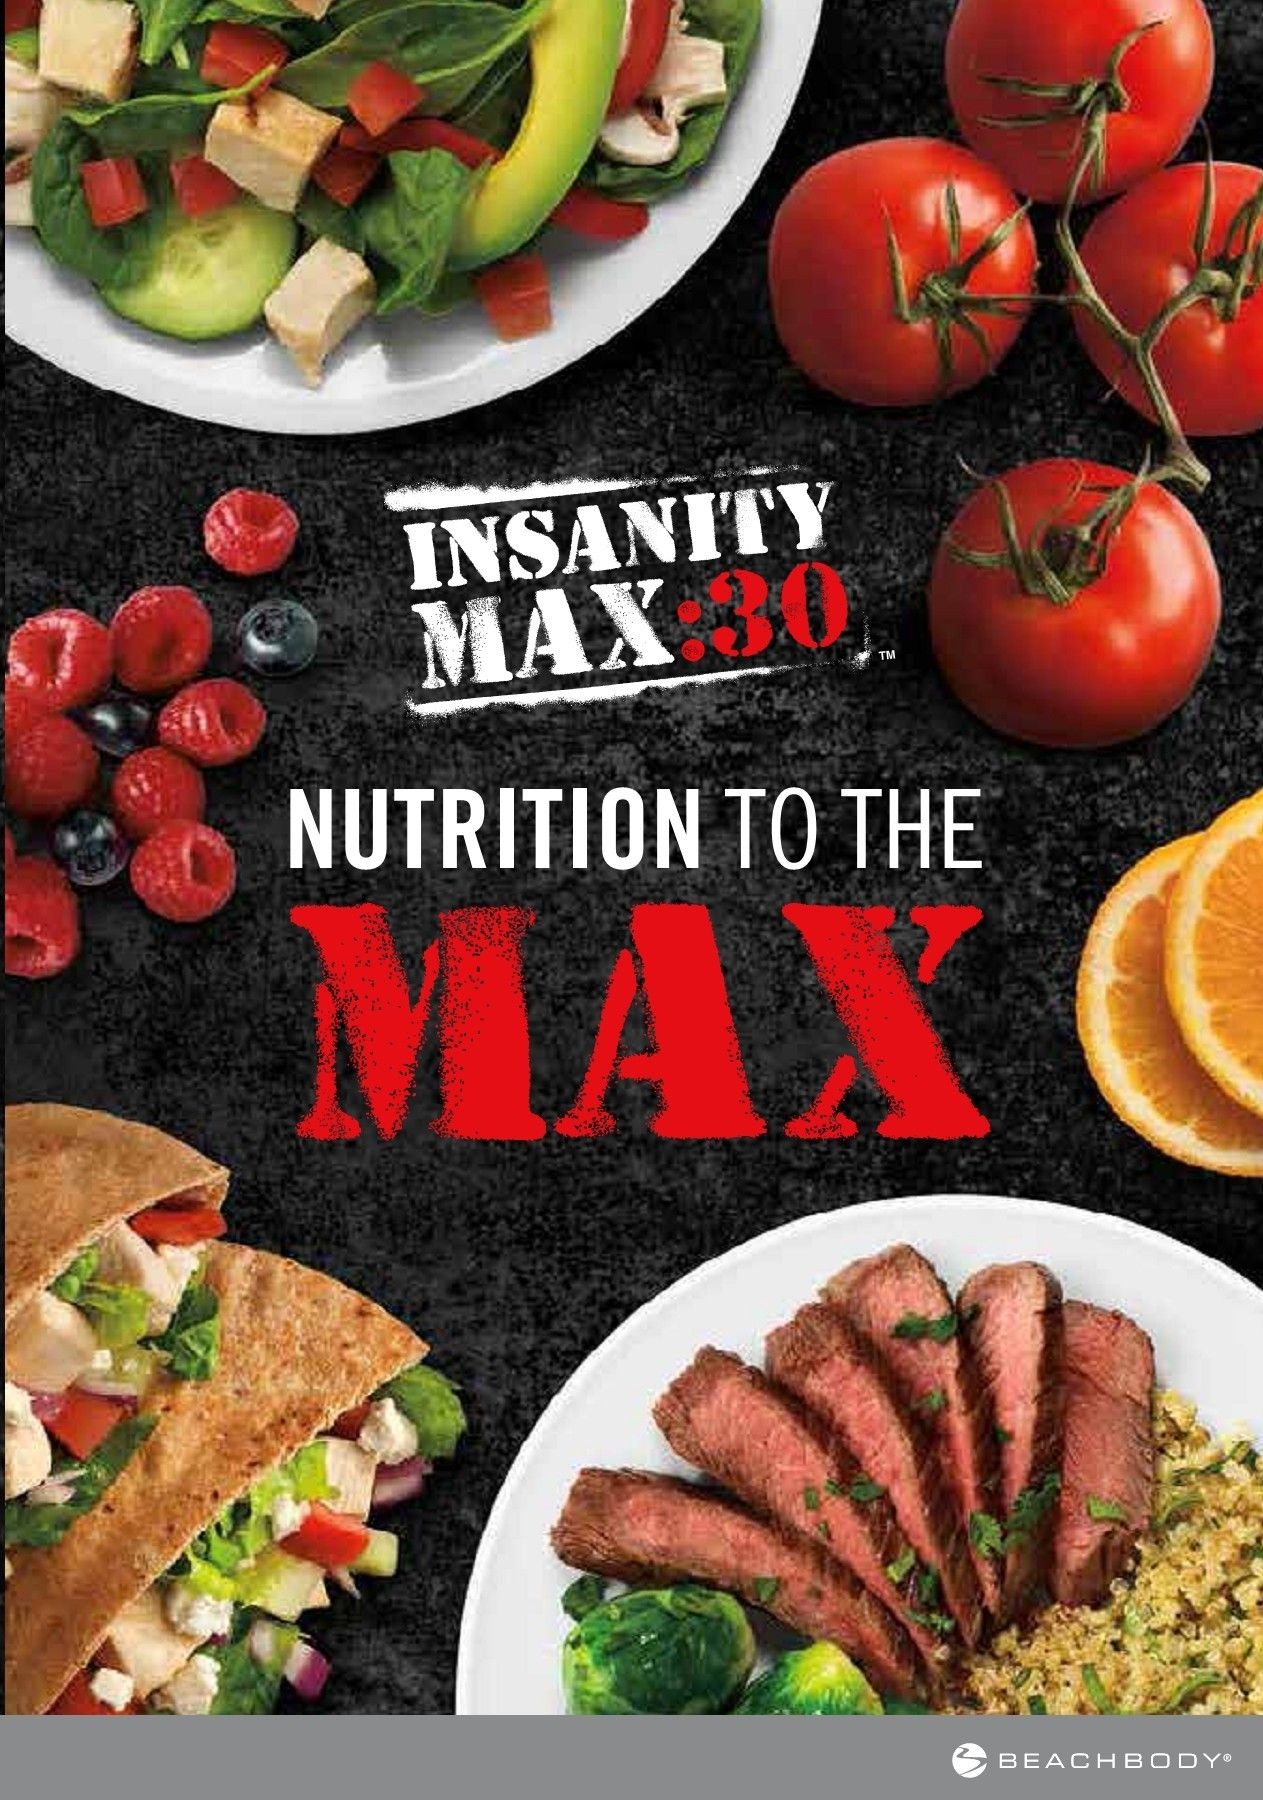 Insanity Max 30 Nutrition Guide Pages 1 50 Flip Pdf